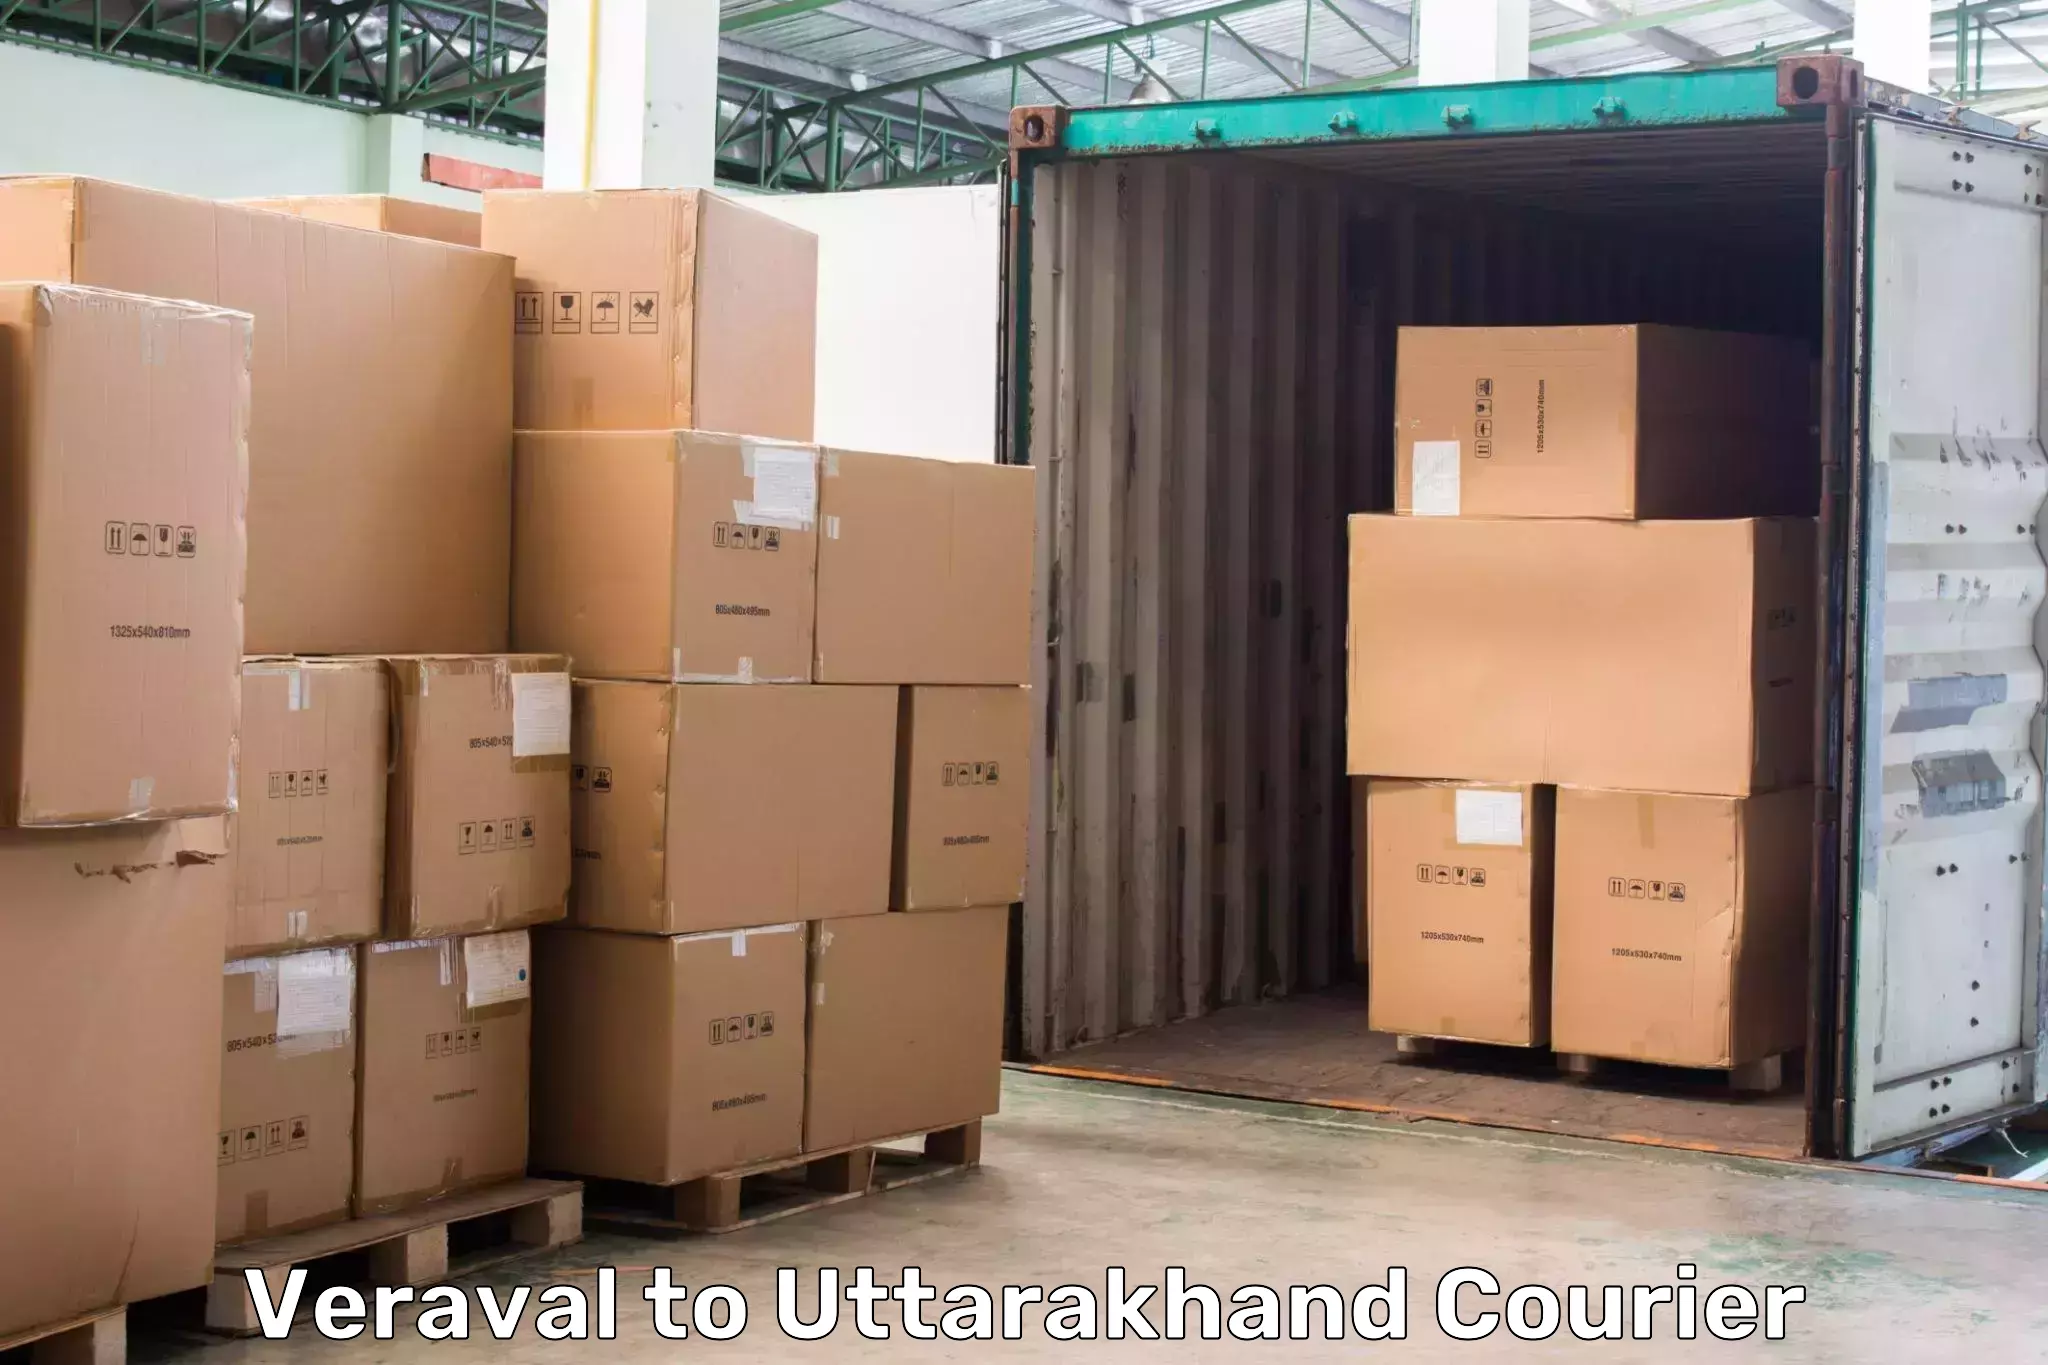 Seamless shipping service Veraval to IIT Roorkee